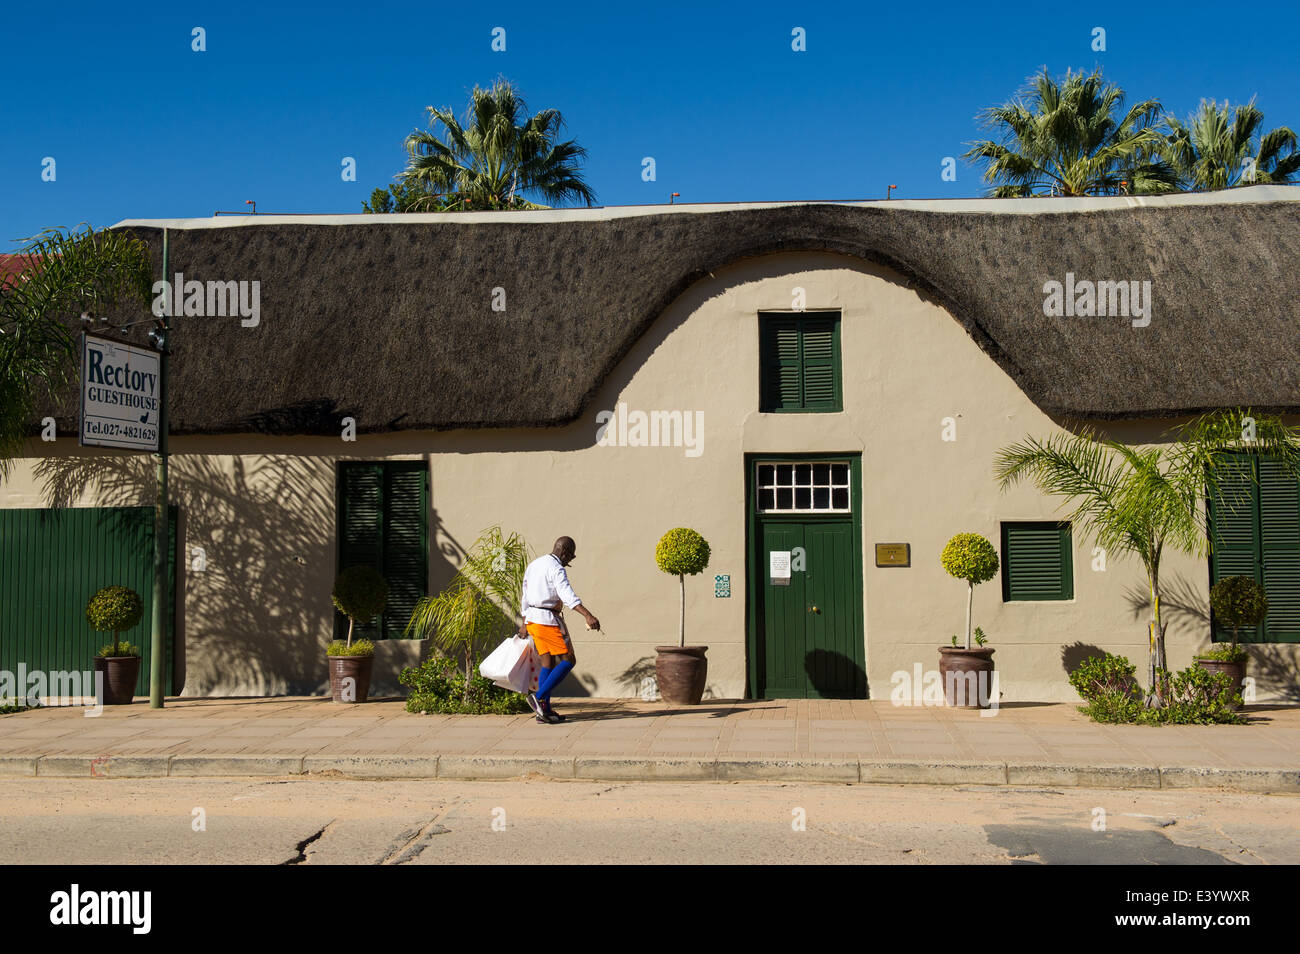 Rectory Guesthouse, Clanwilliam, South Africa Stock Photo